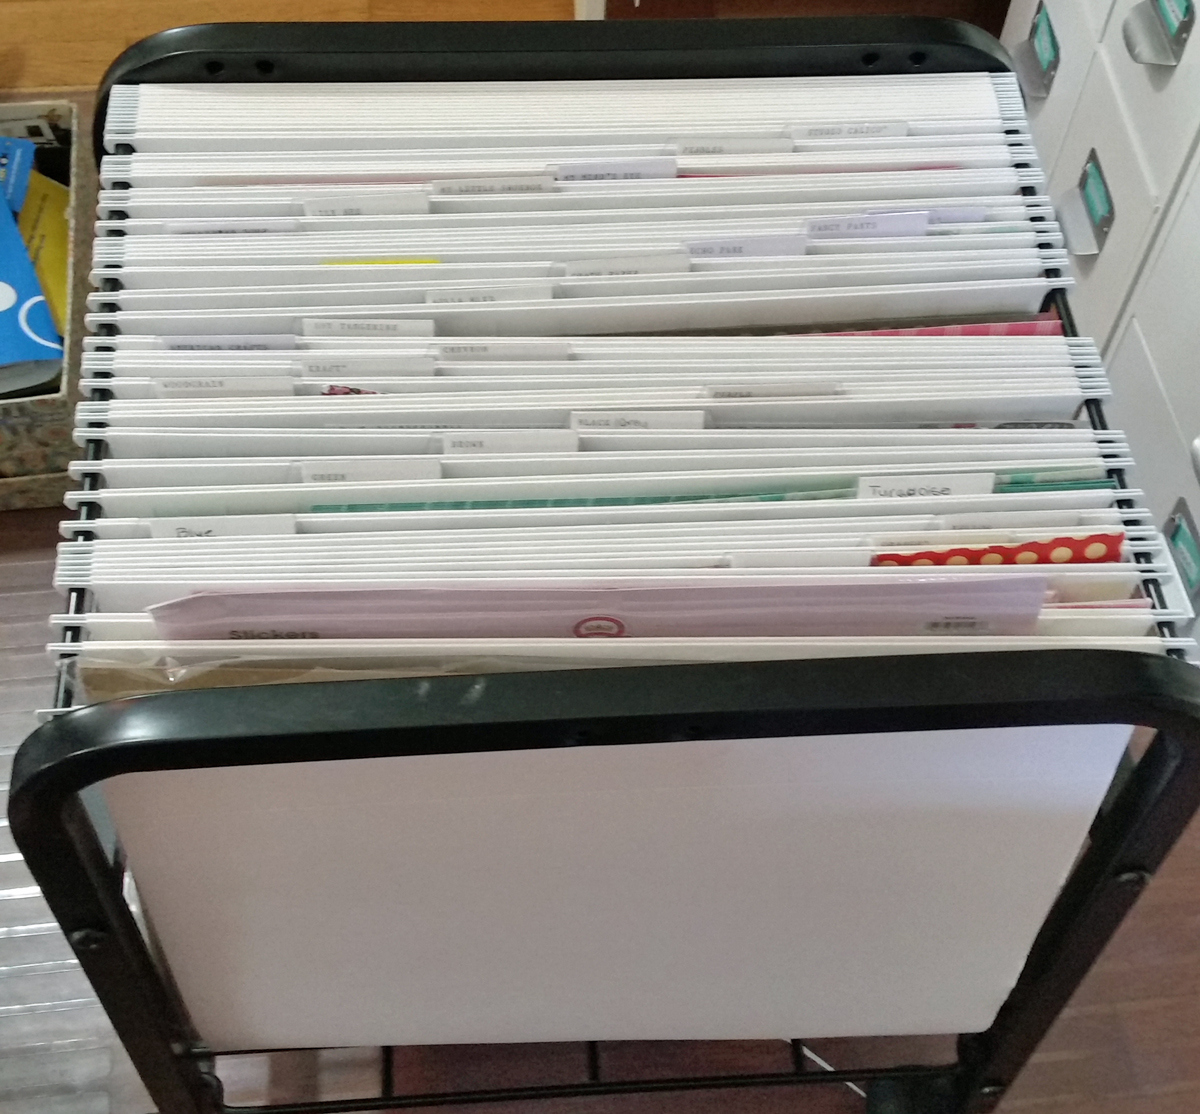 Patterned Paper Storage - Kat's Adventures in Paper Crafting